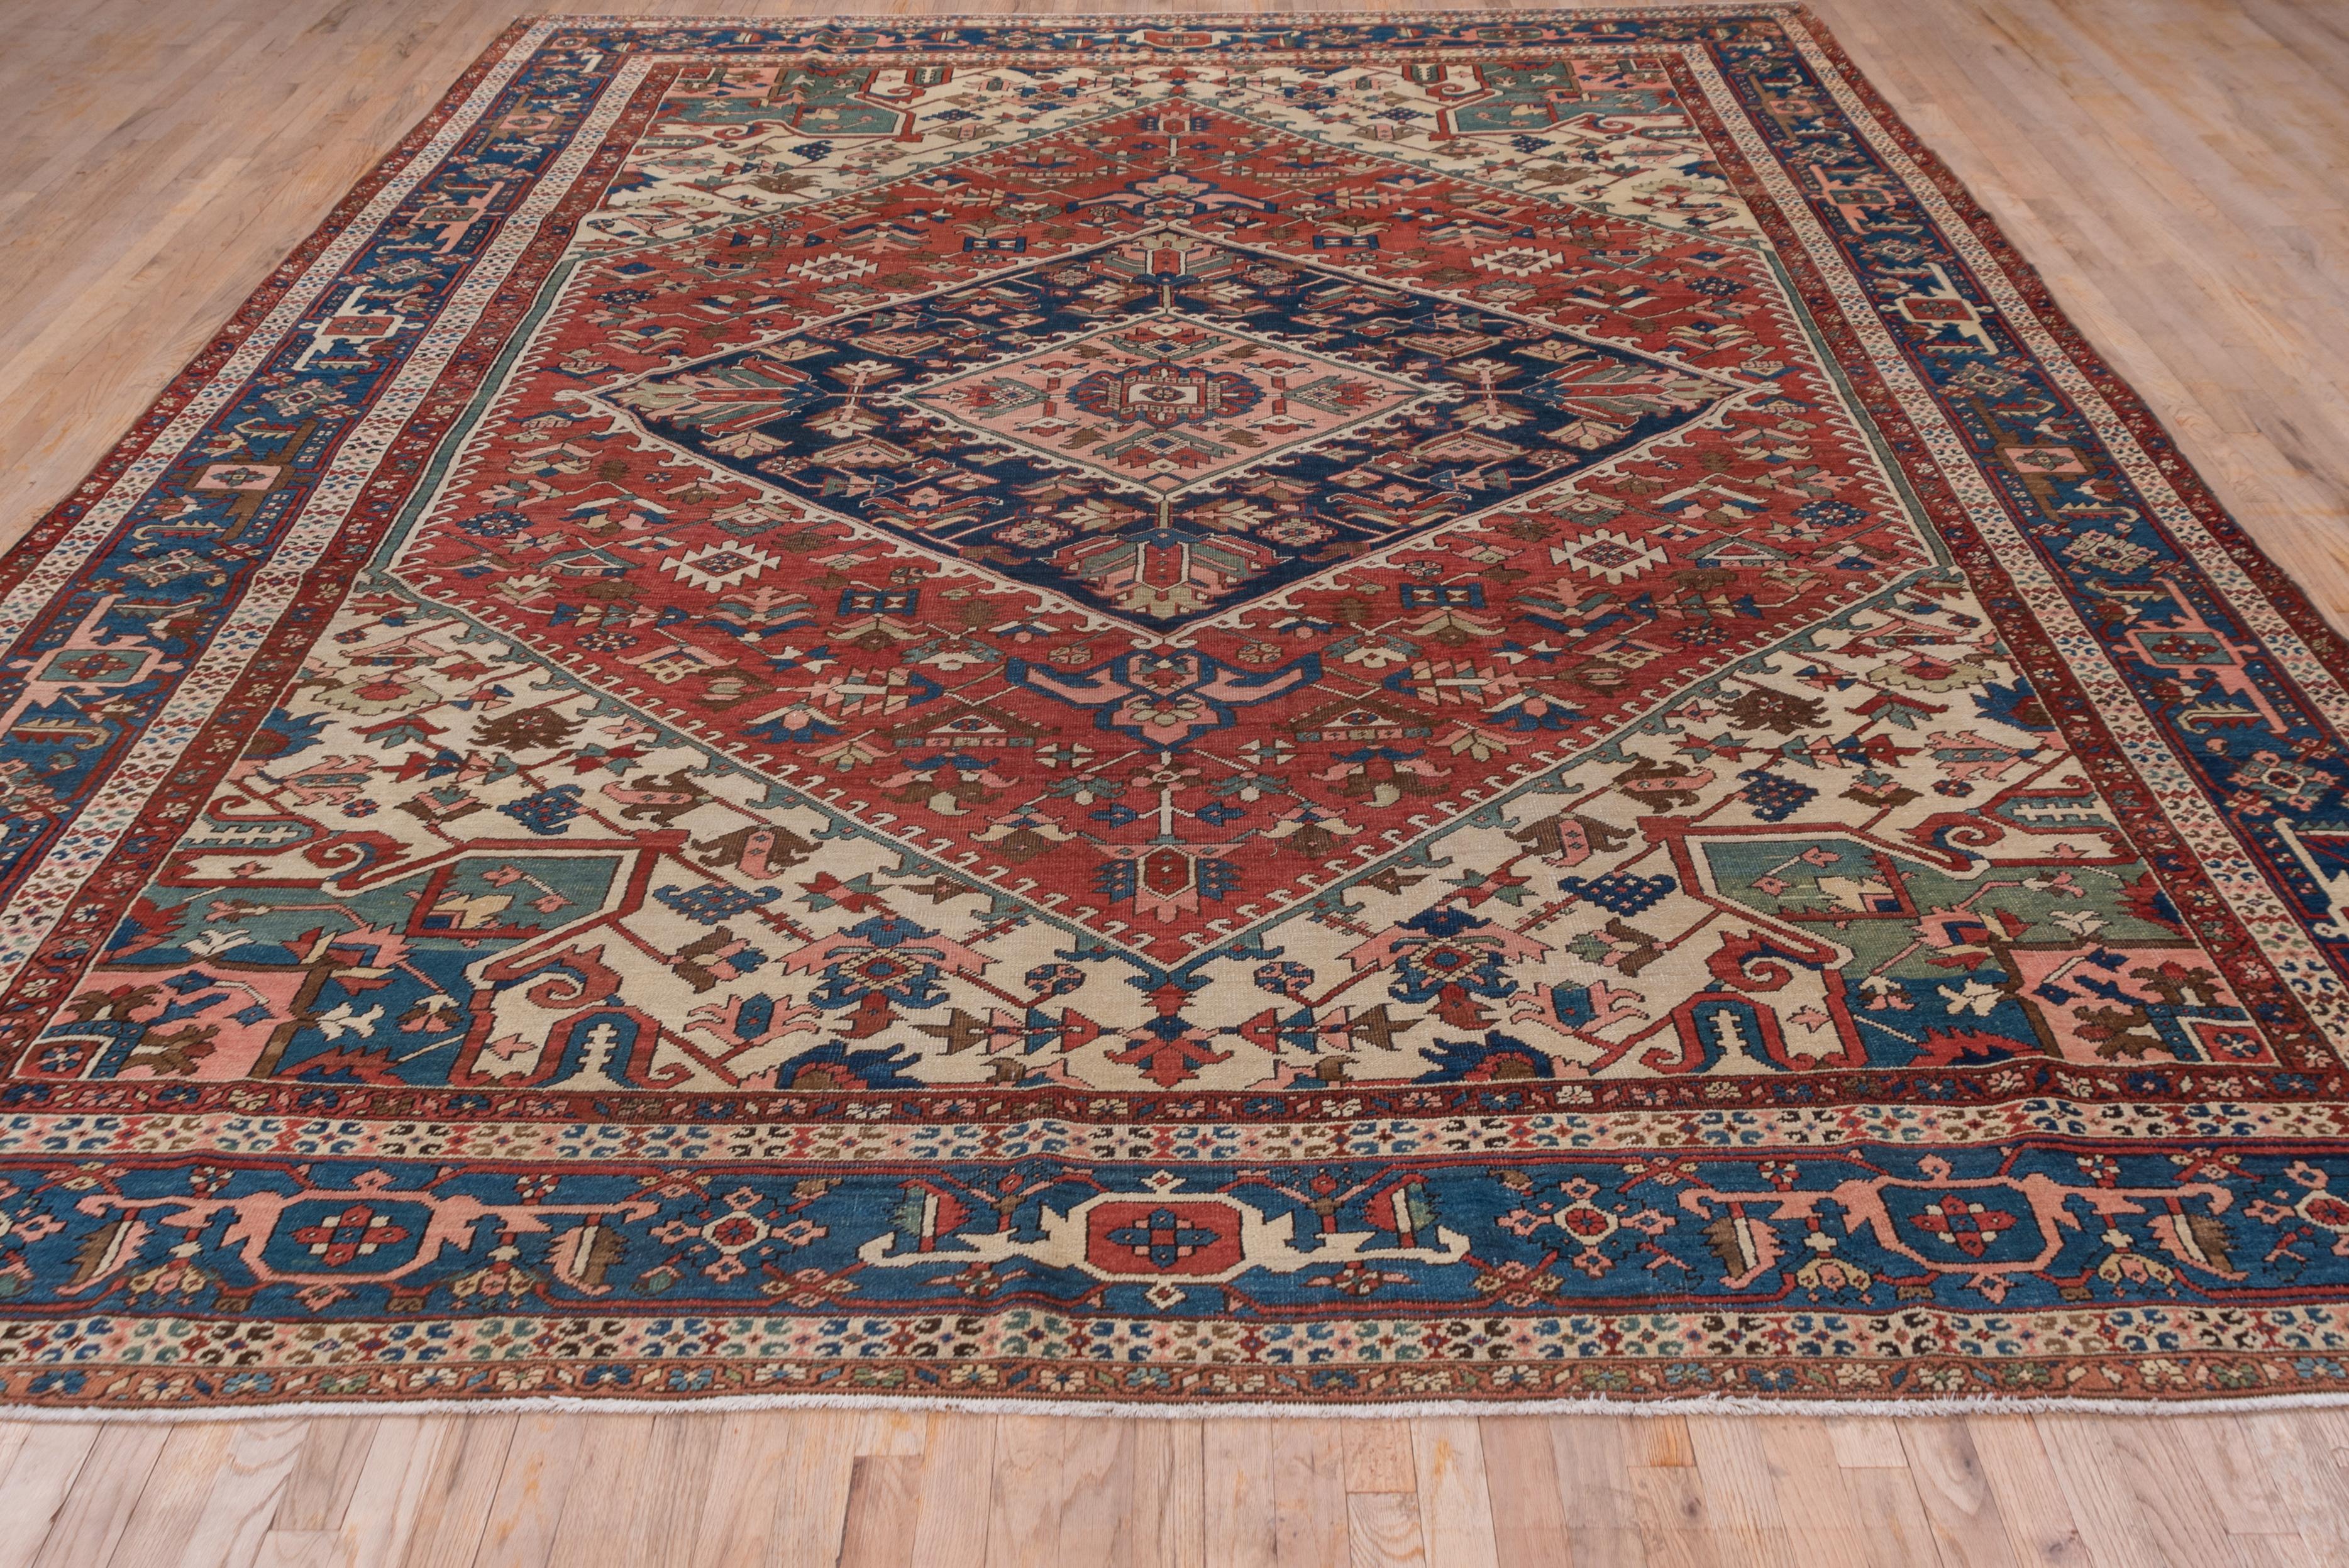 Antique Persian Serapi Rug, Rust Field, Blue Borders, Pink and Green Accents In Good Condition For Sale In New York, NY